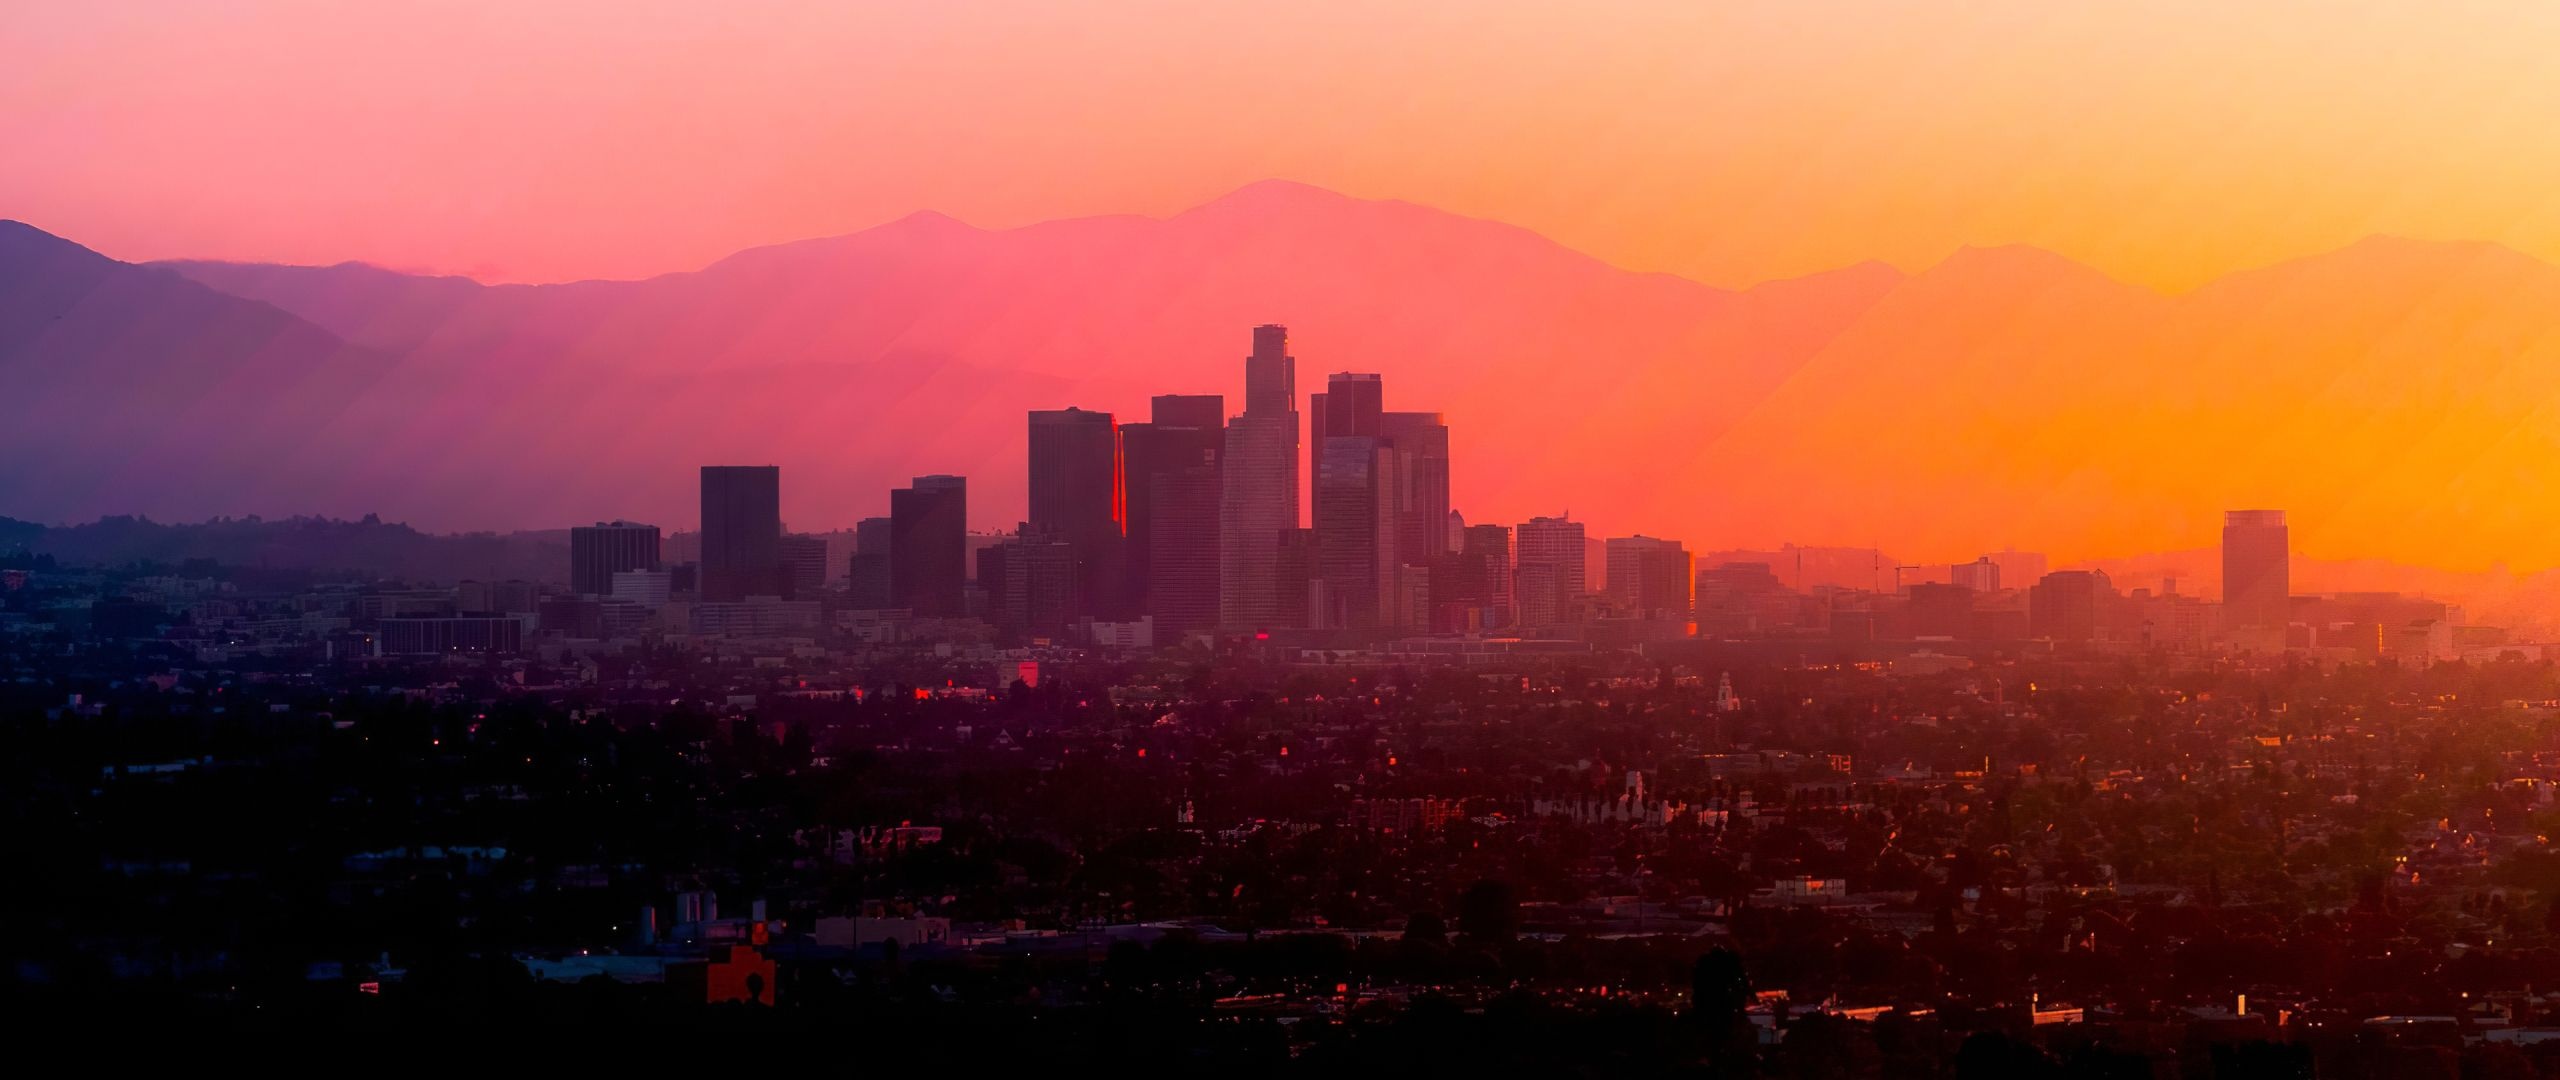 Los Angeles: The 14th largest city in land area in the United States. 2560x1080 Dual Screen Background.